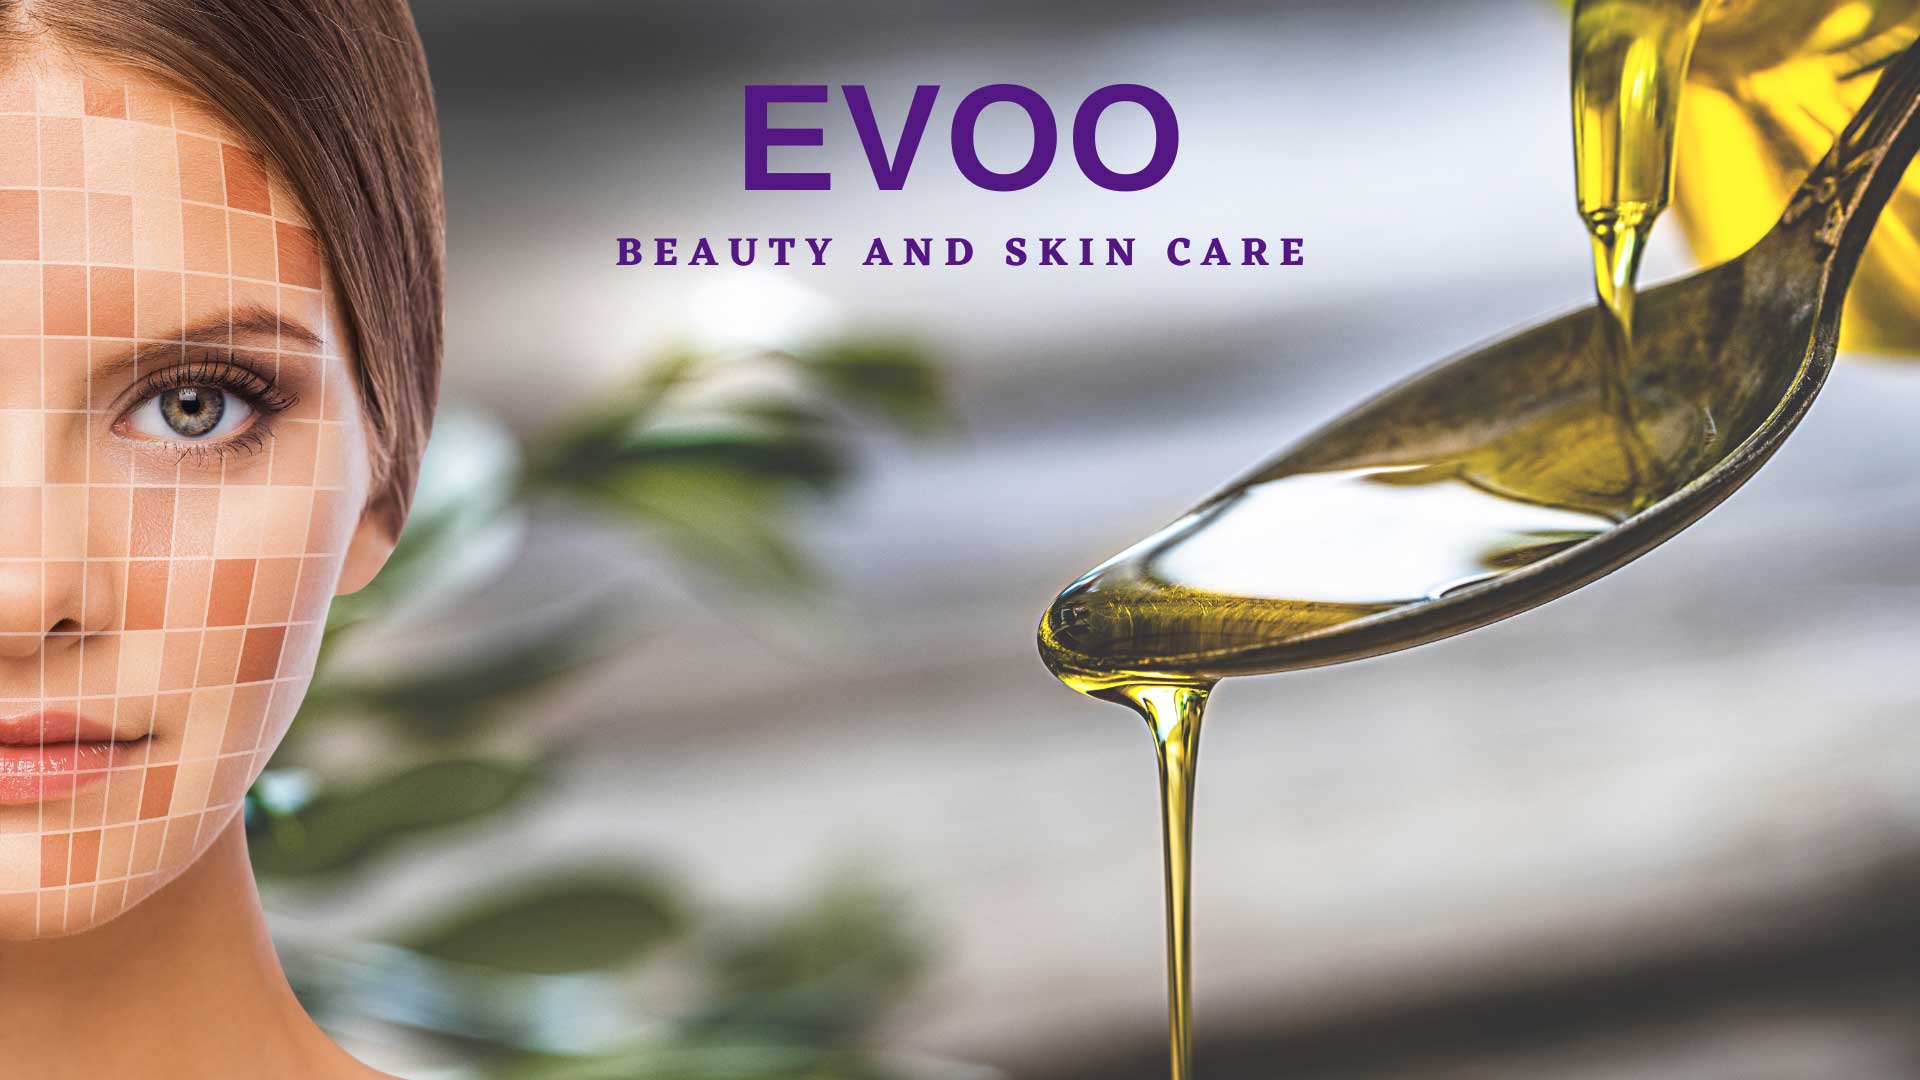 Extra Virgin Olive Oil: beauty and skin care